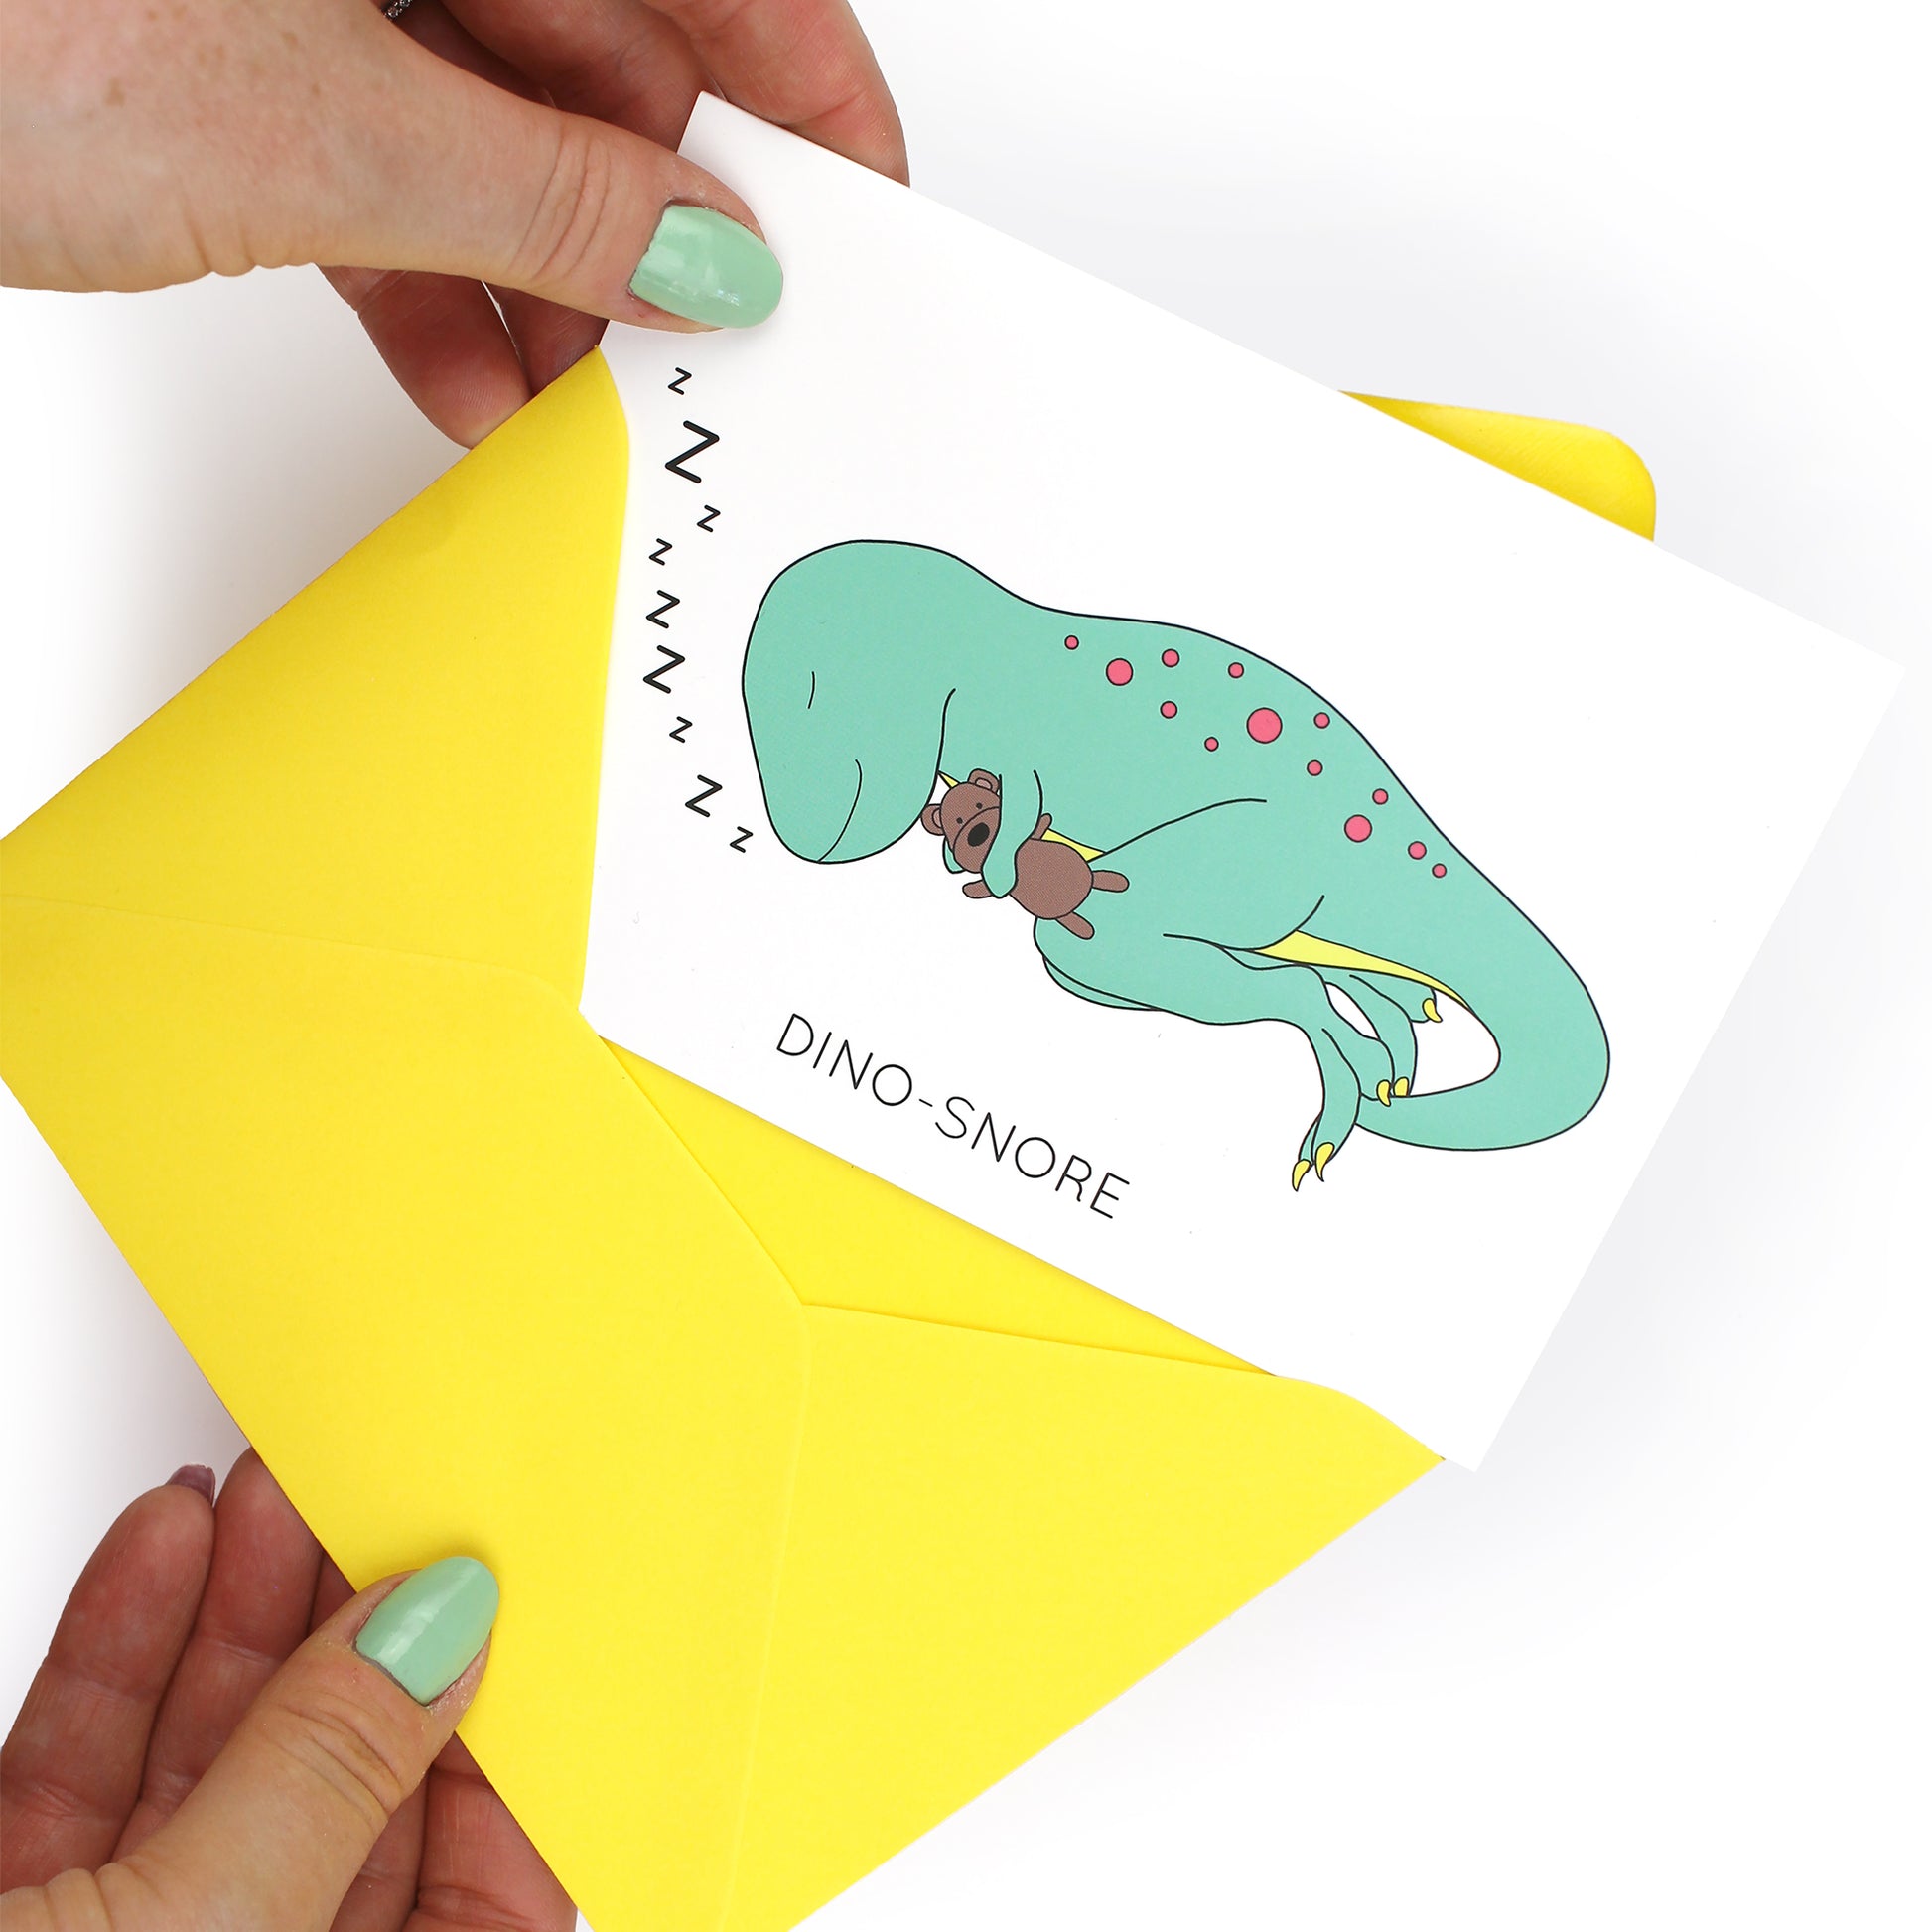 hands holding an envelope while removing the dino-snore dinosaur card from the envelope